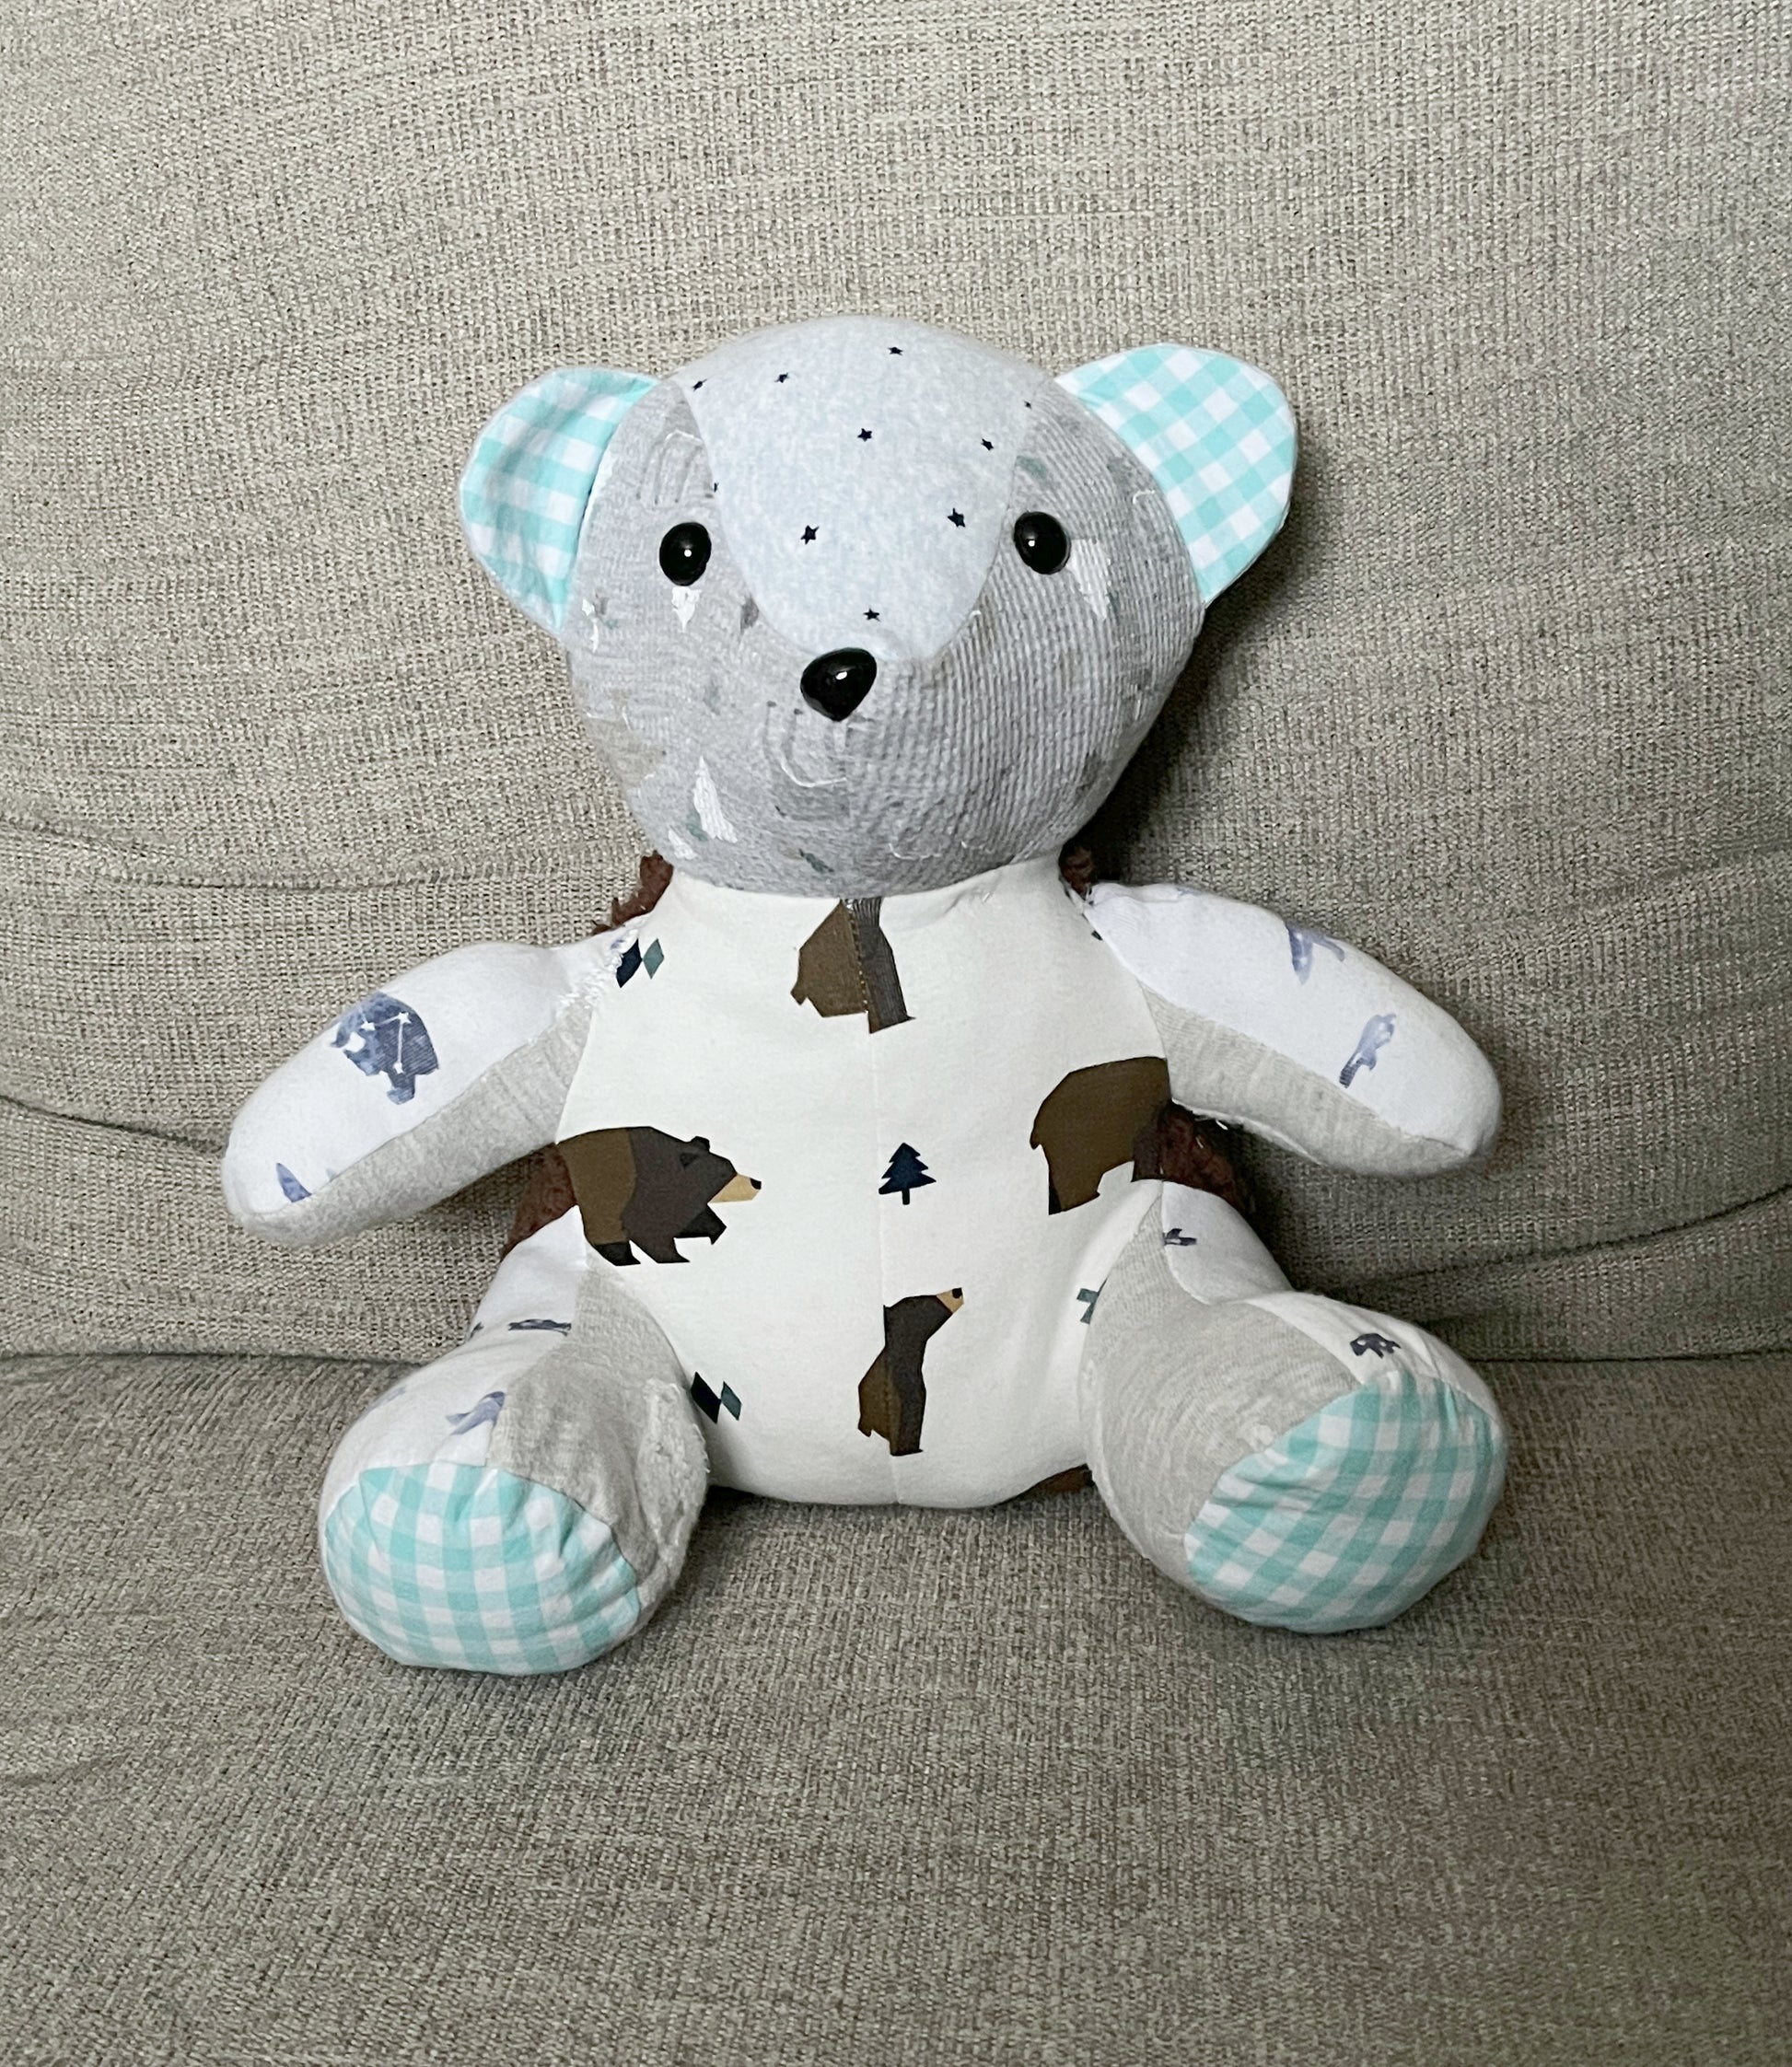 fuzzy back bear all finished and ready to go to his forever home